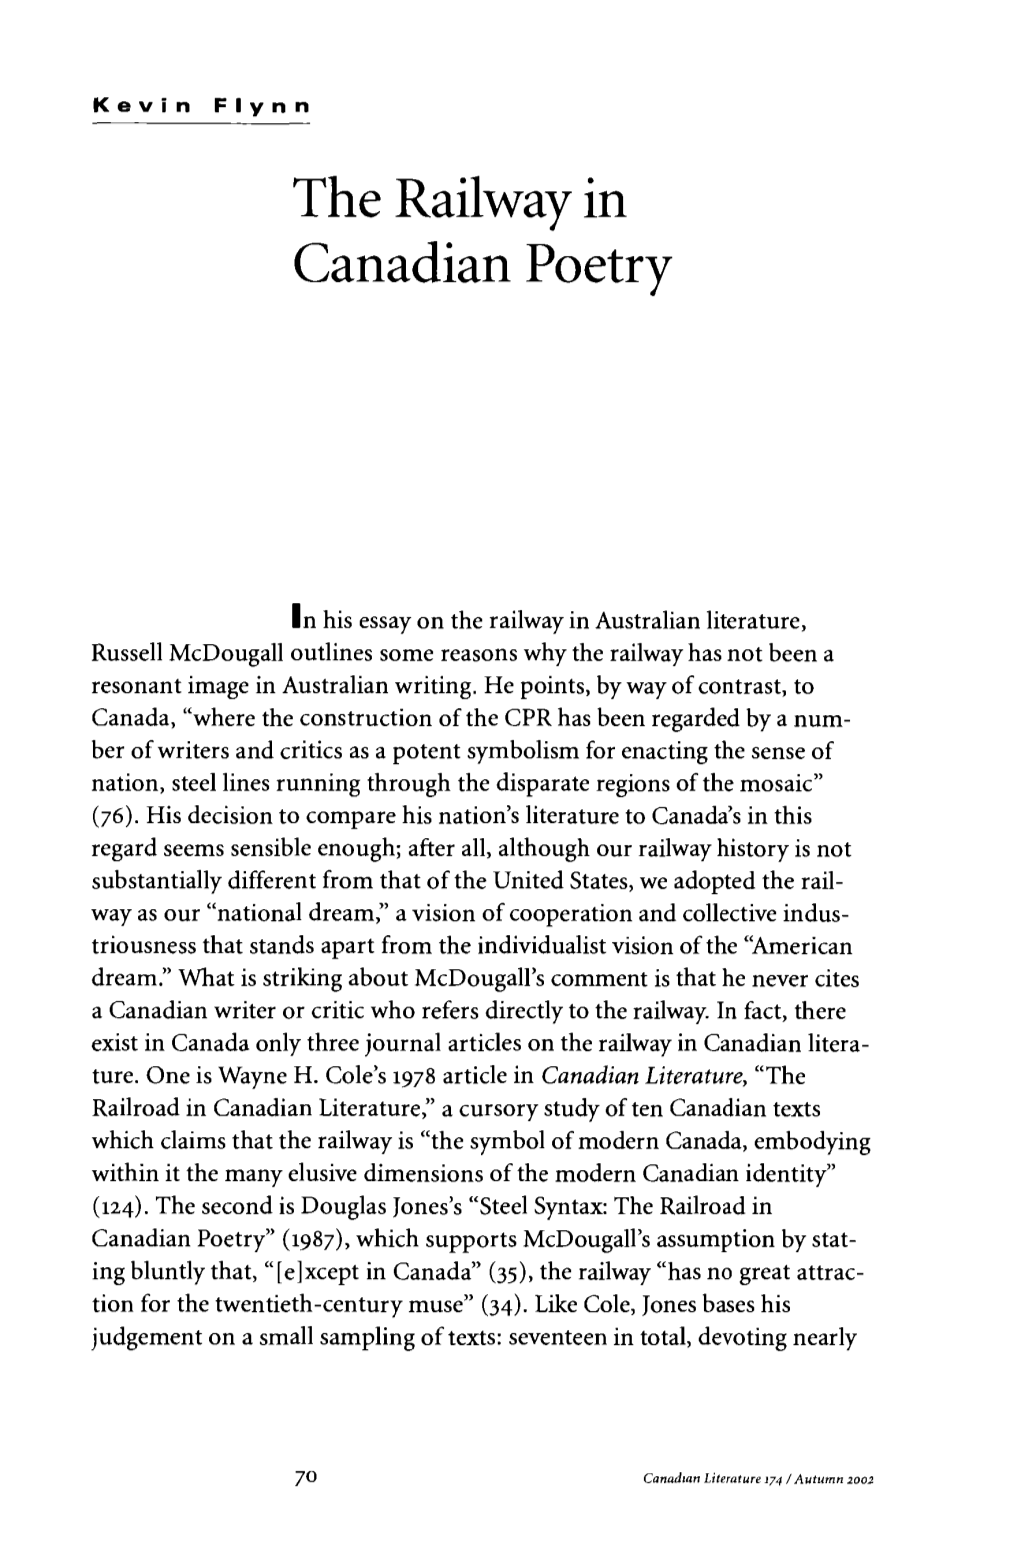 The Railway in Canadian Poetry